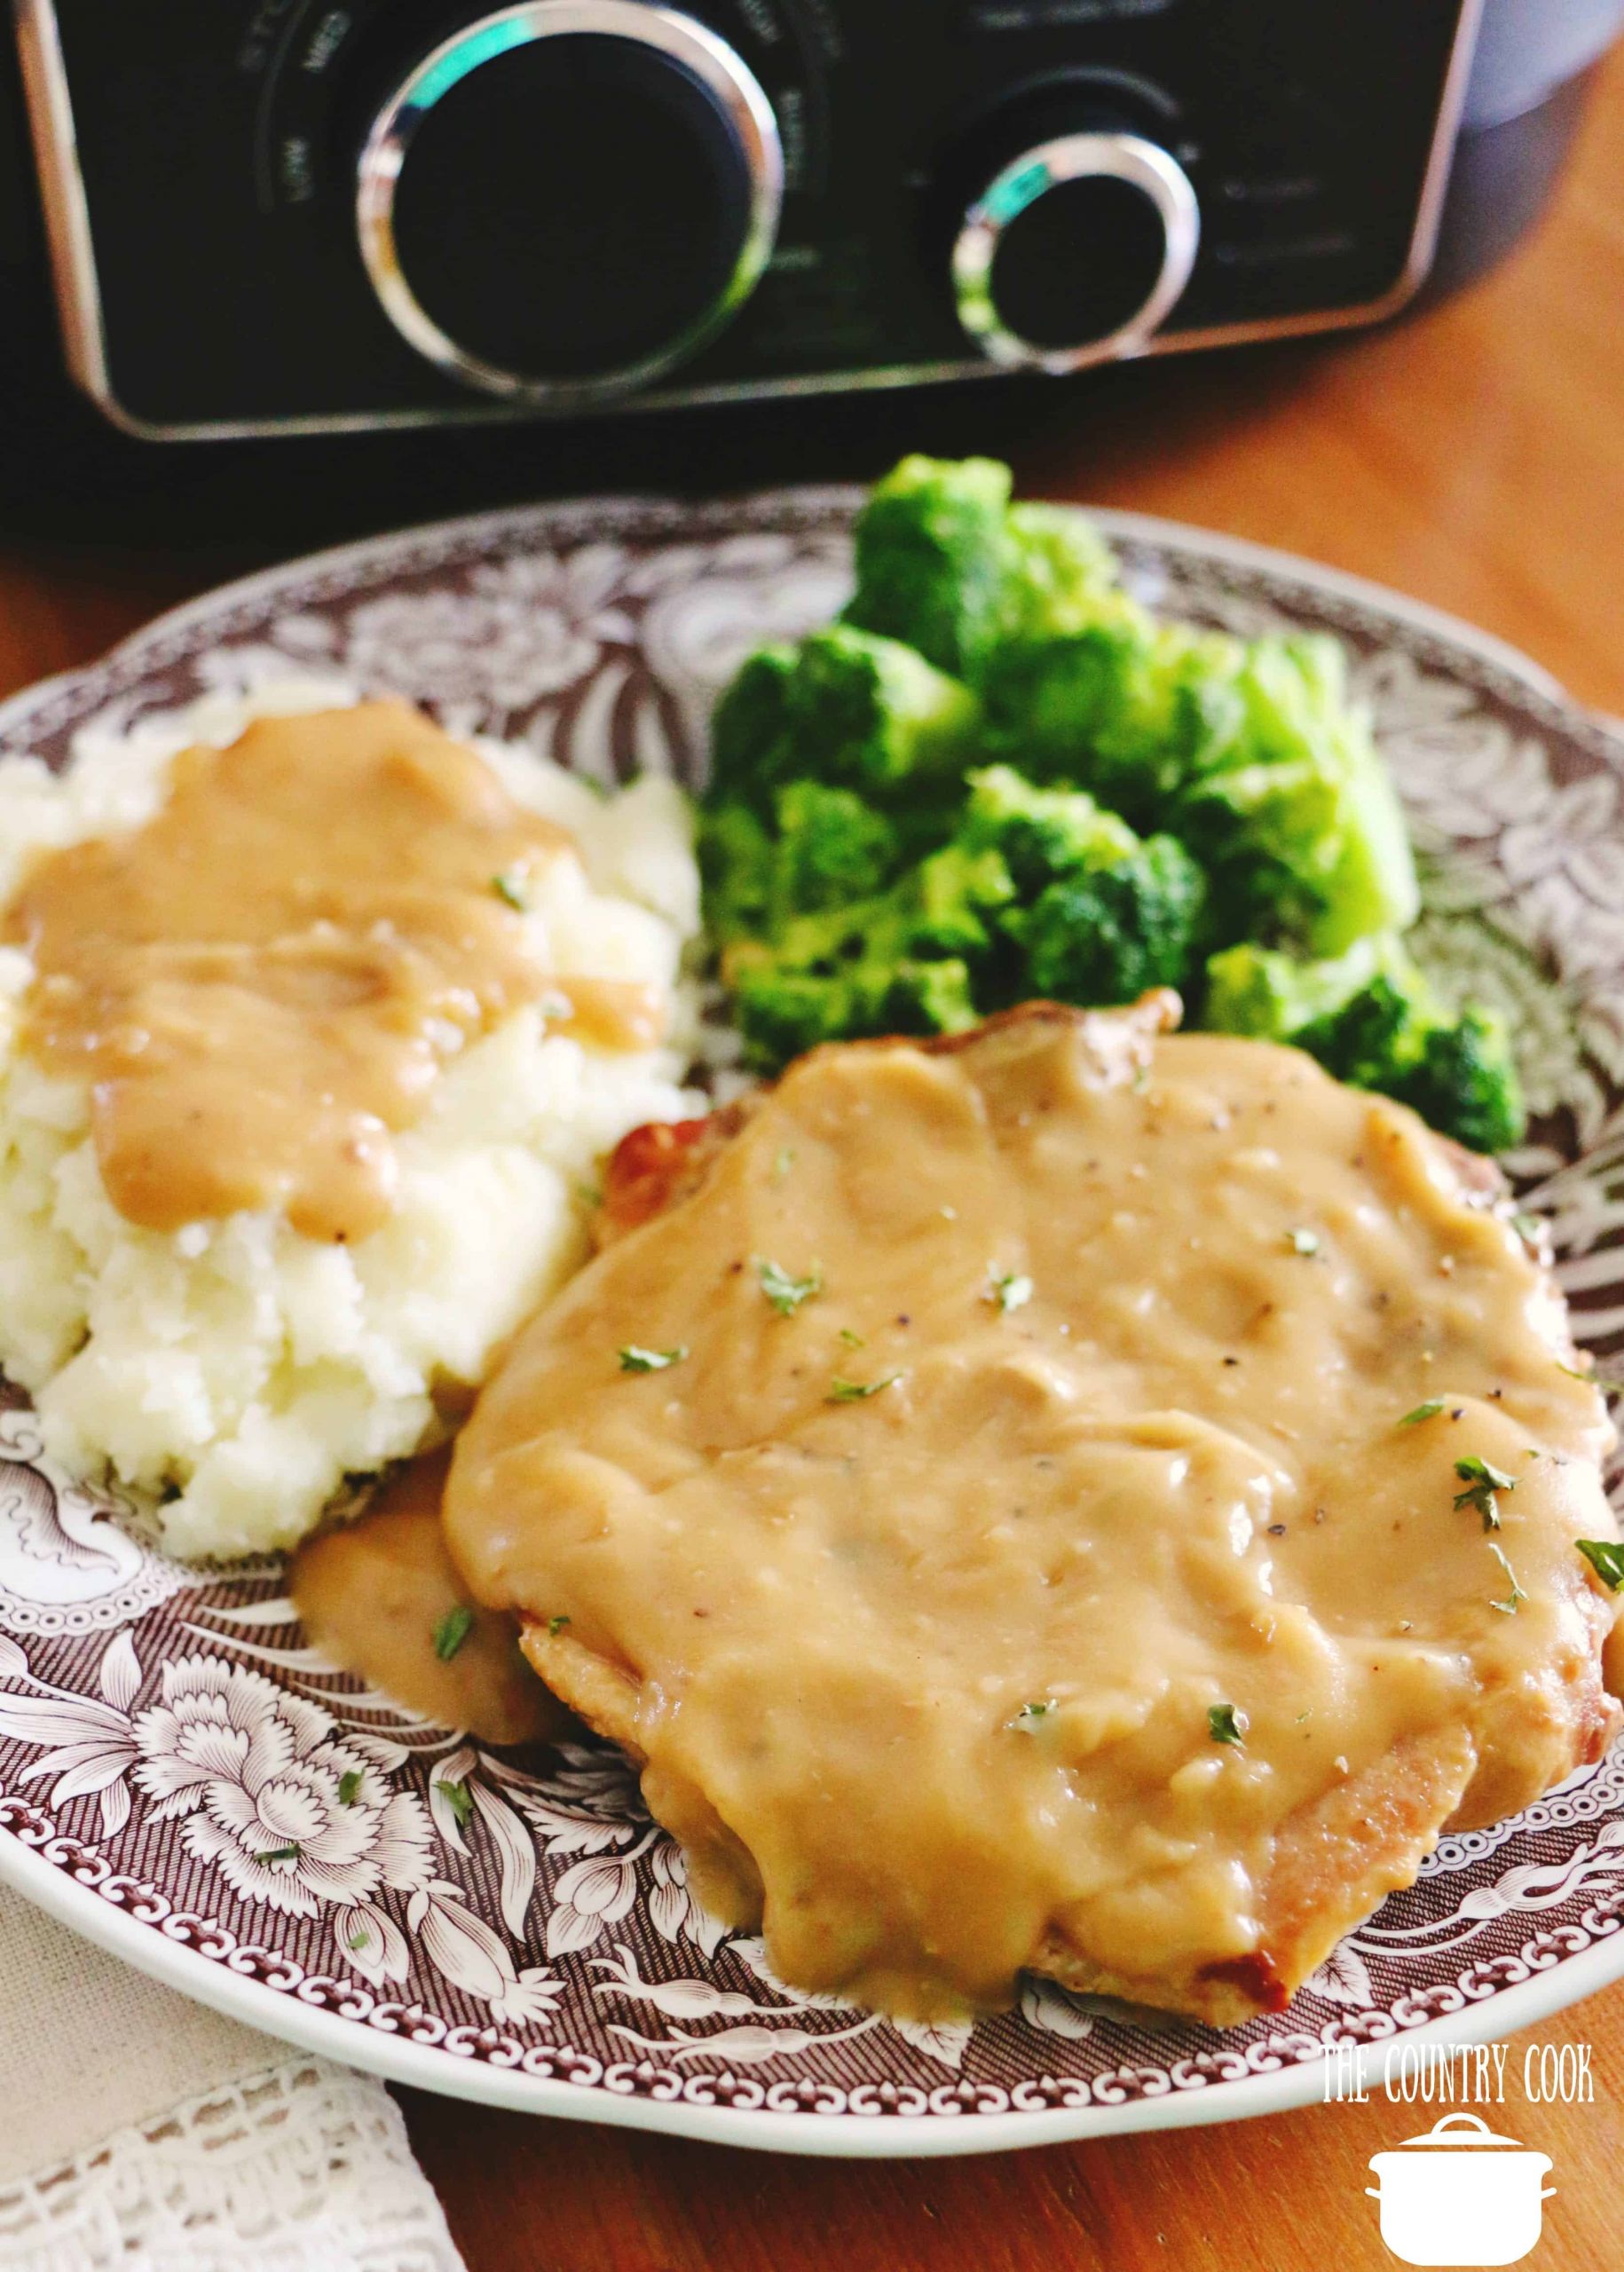 Slow Cooker Pork Chops And Gravy
 Crock Pot Pork Chops with Gravy Video The Country Cook